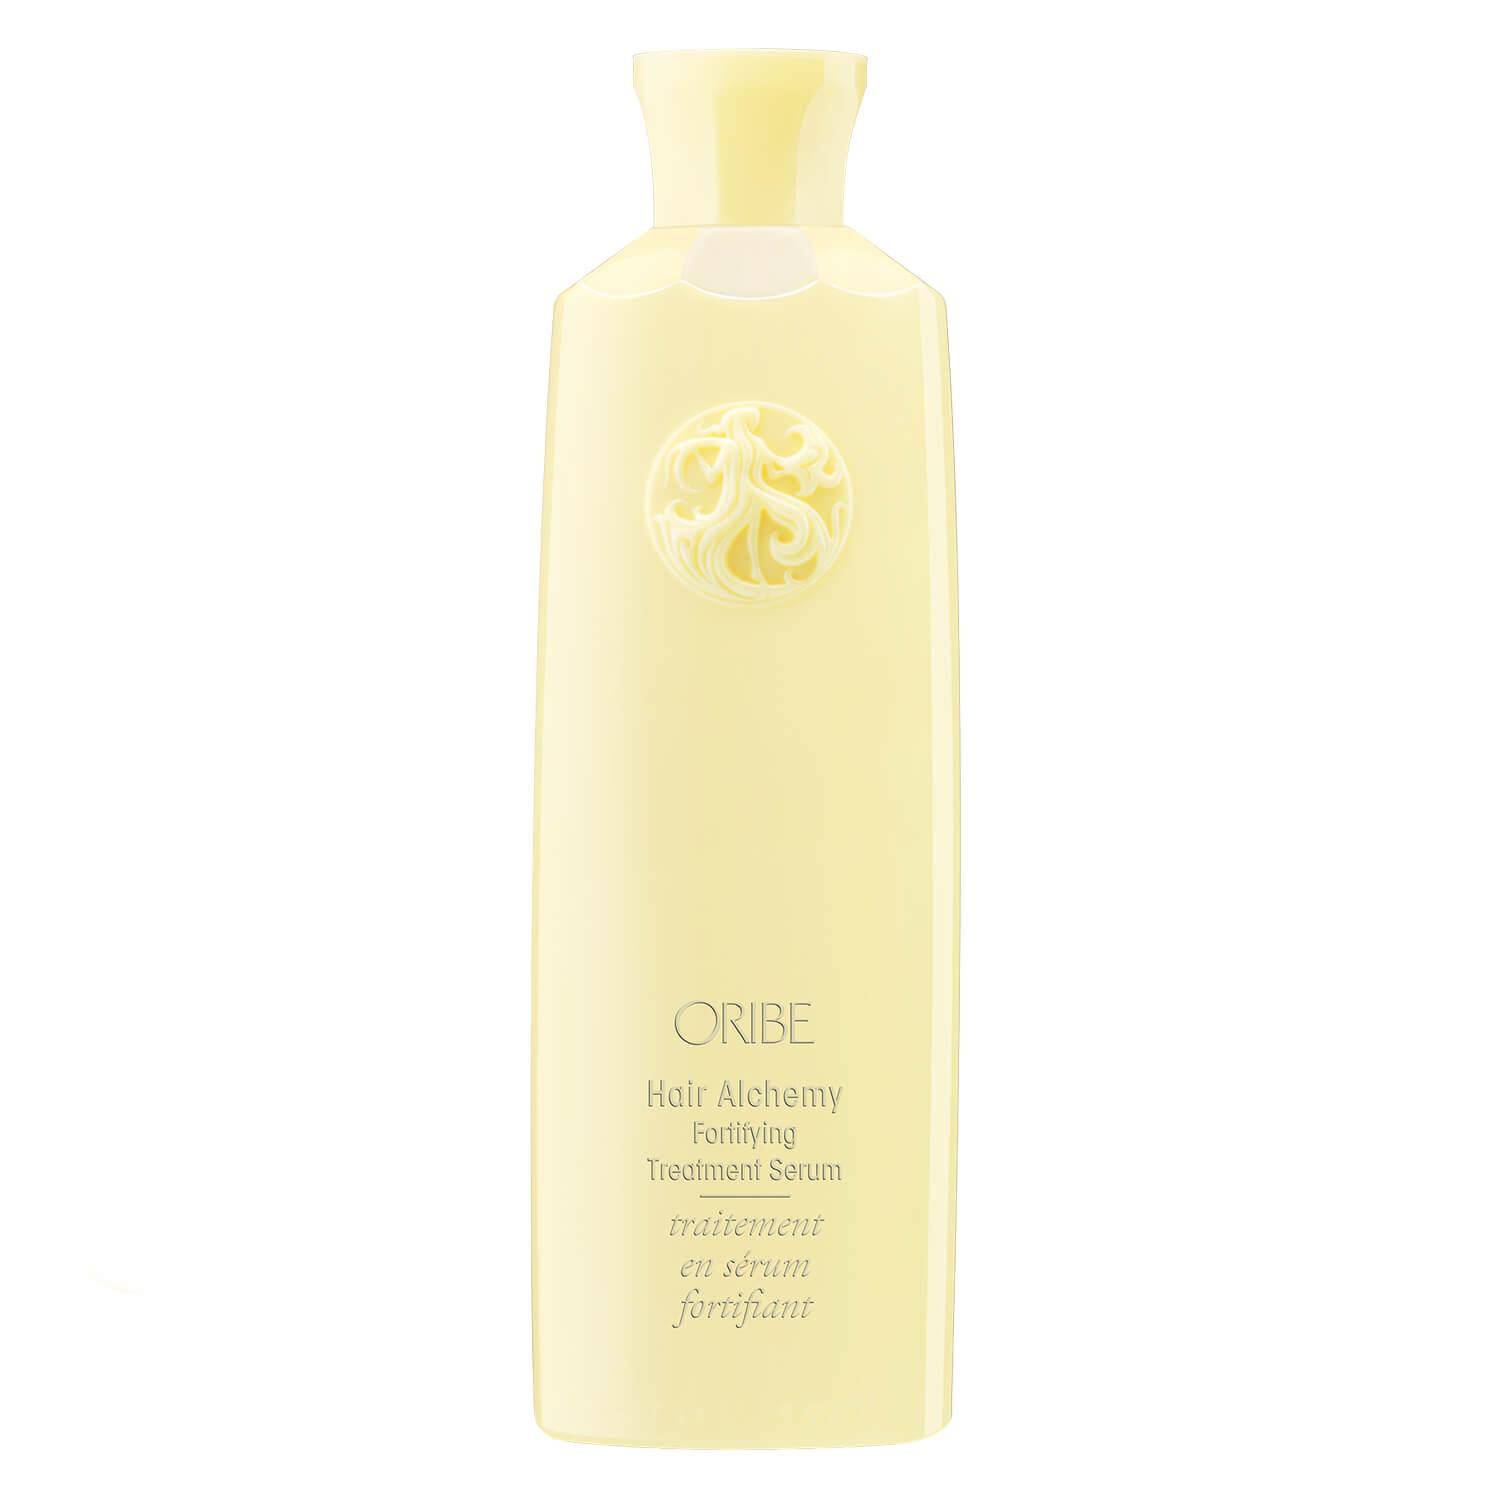 Oribe Care - Hair Alchemy Fortifying Treatment Serum